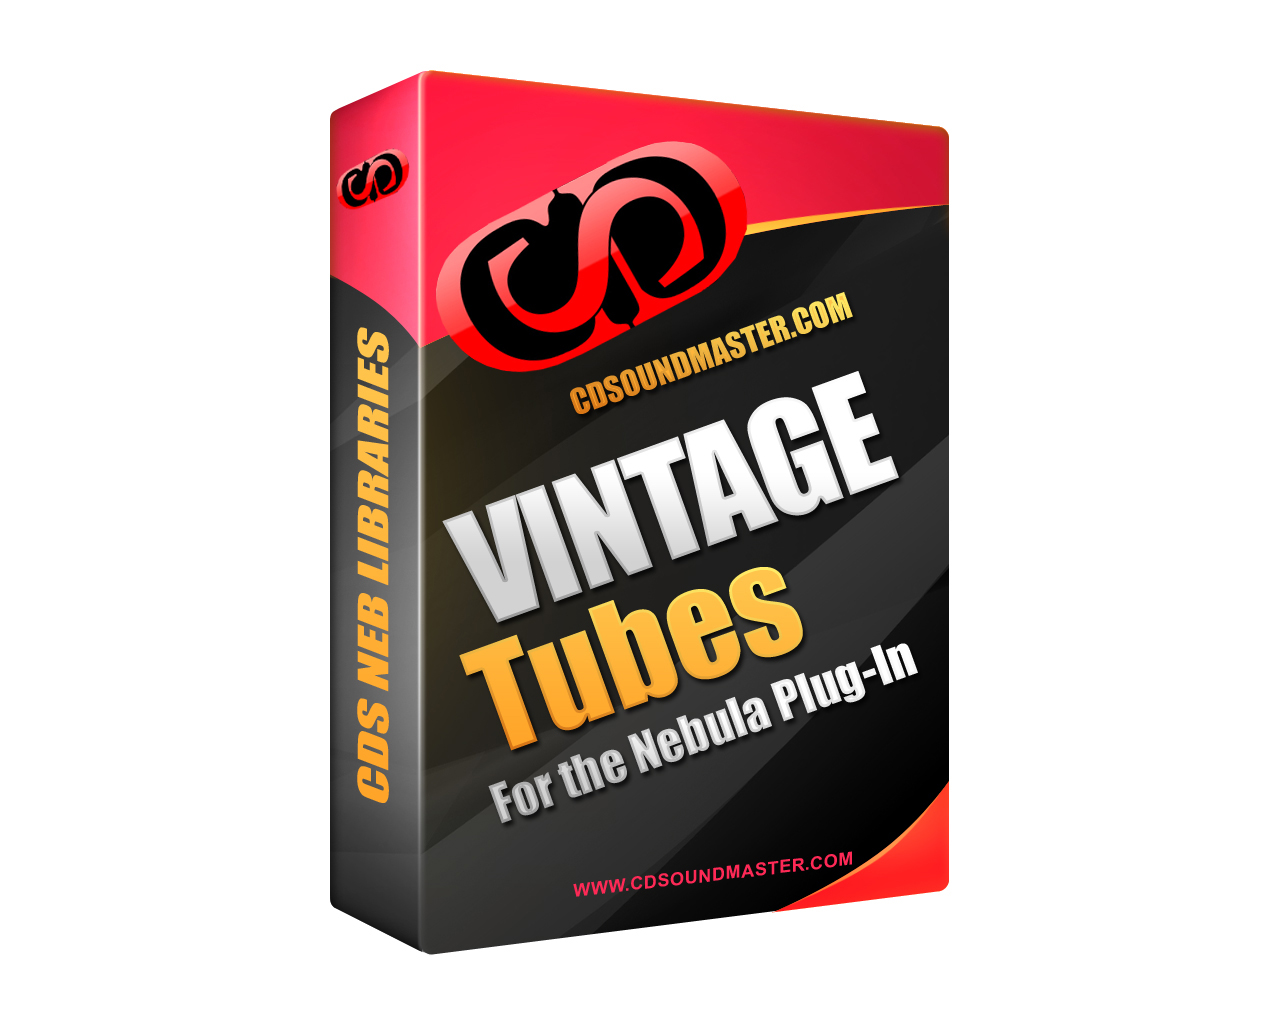 The Vintage Tube Collection Program Library for the Nebula Plug-In